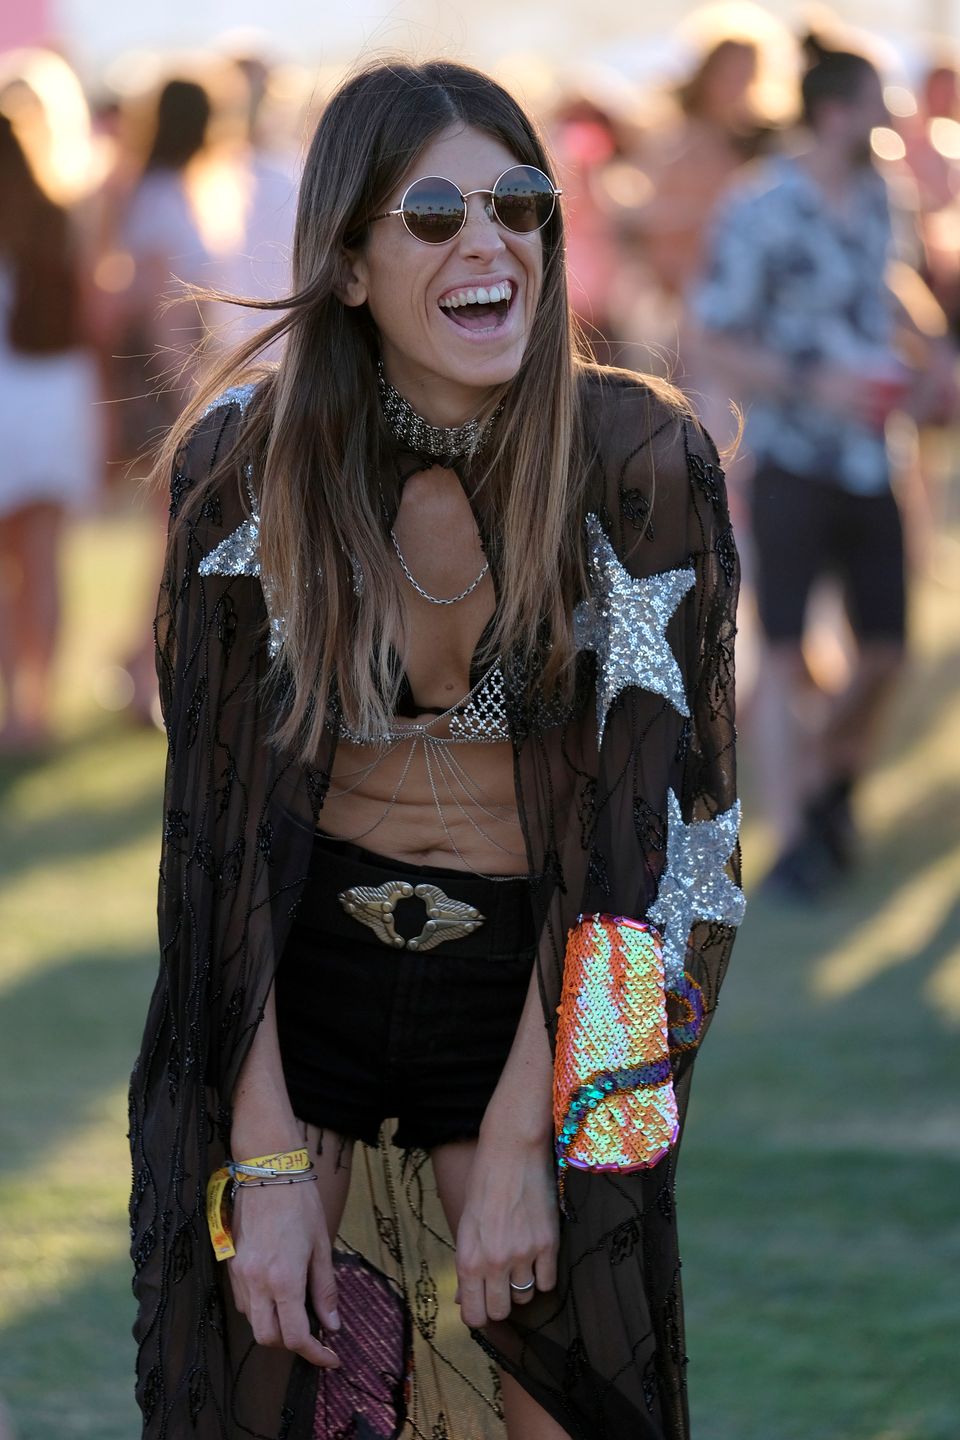 Behold, The Most Coachella Outfits At Coachella | HuffPost Life